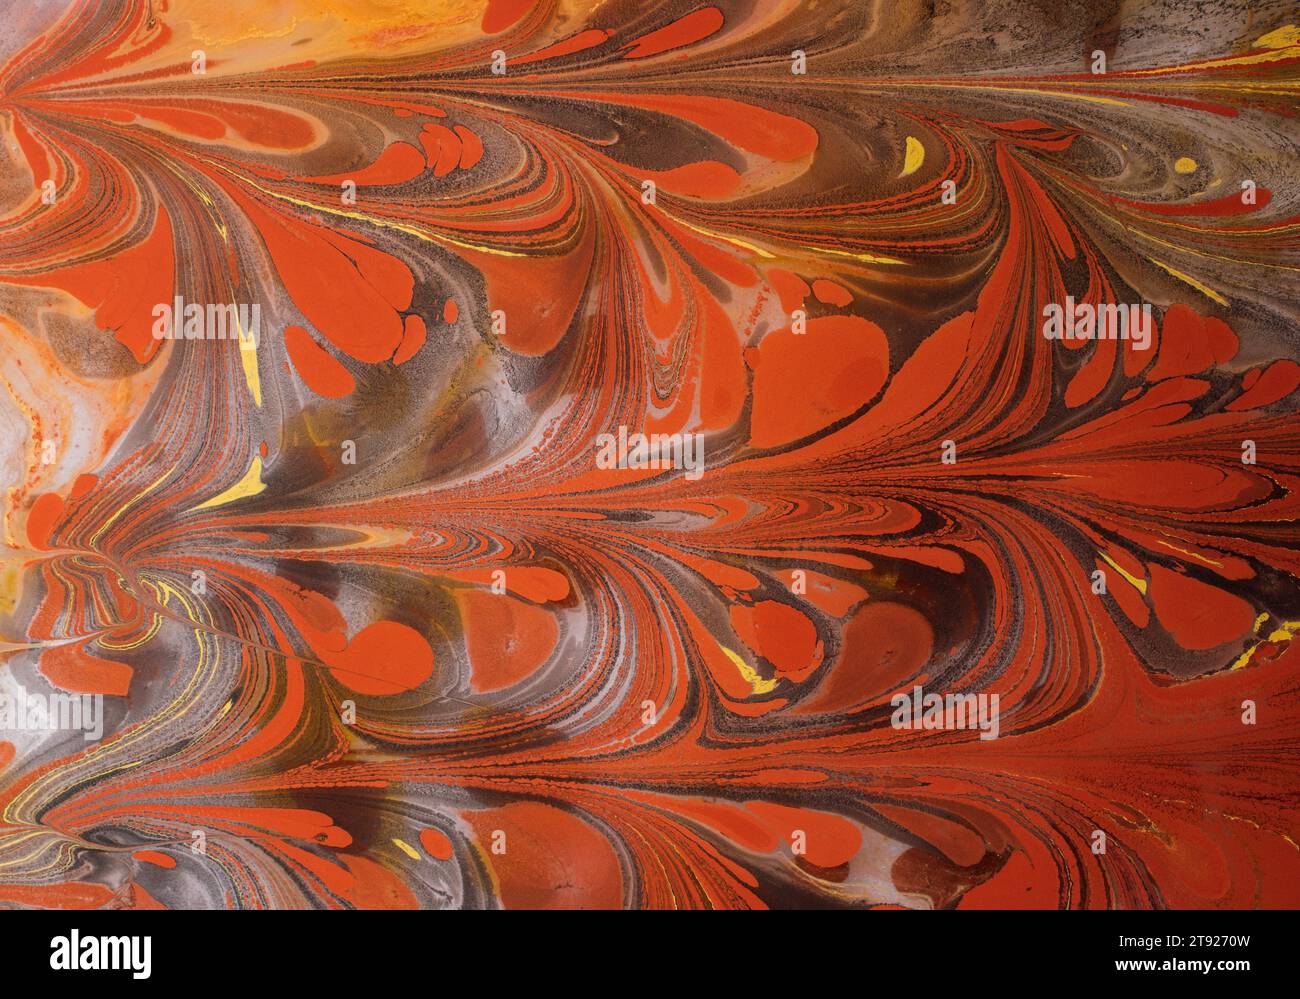 Abstract marbling pattern for fabric, design. Creative marbling background texture Stock Photo